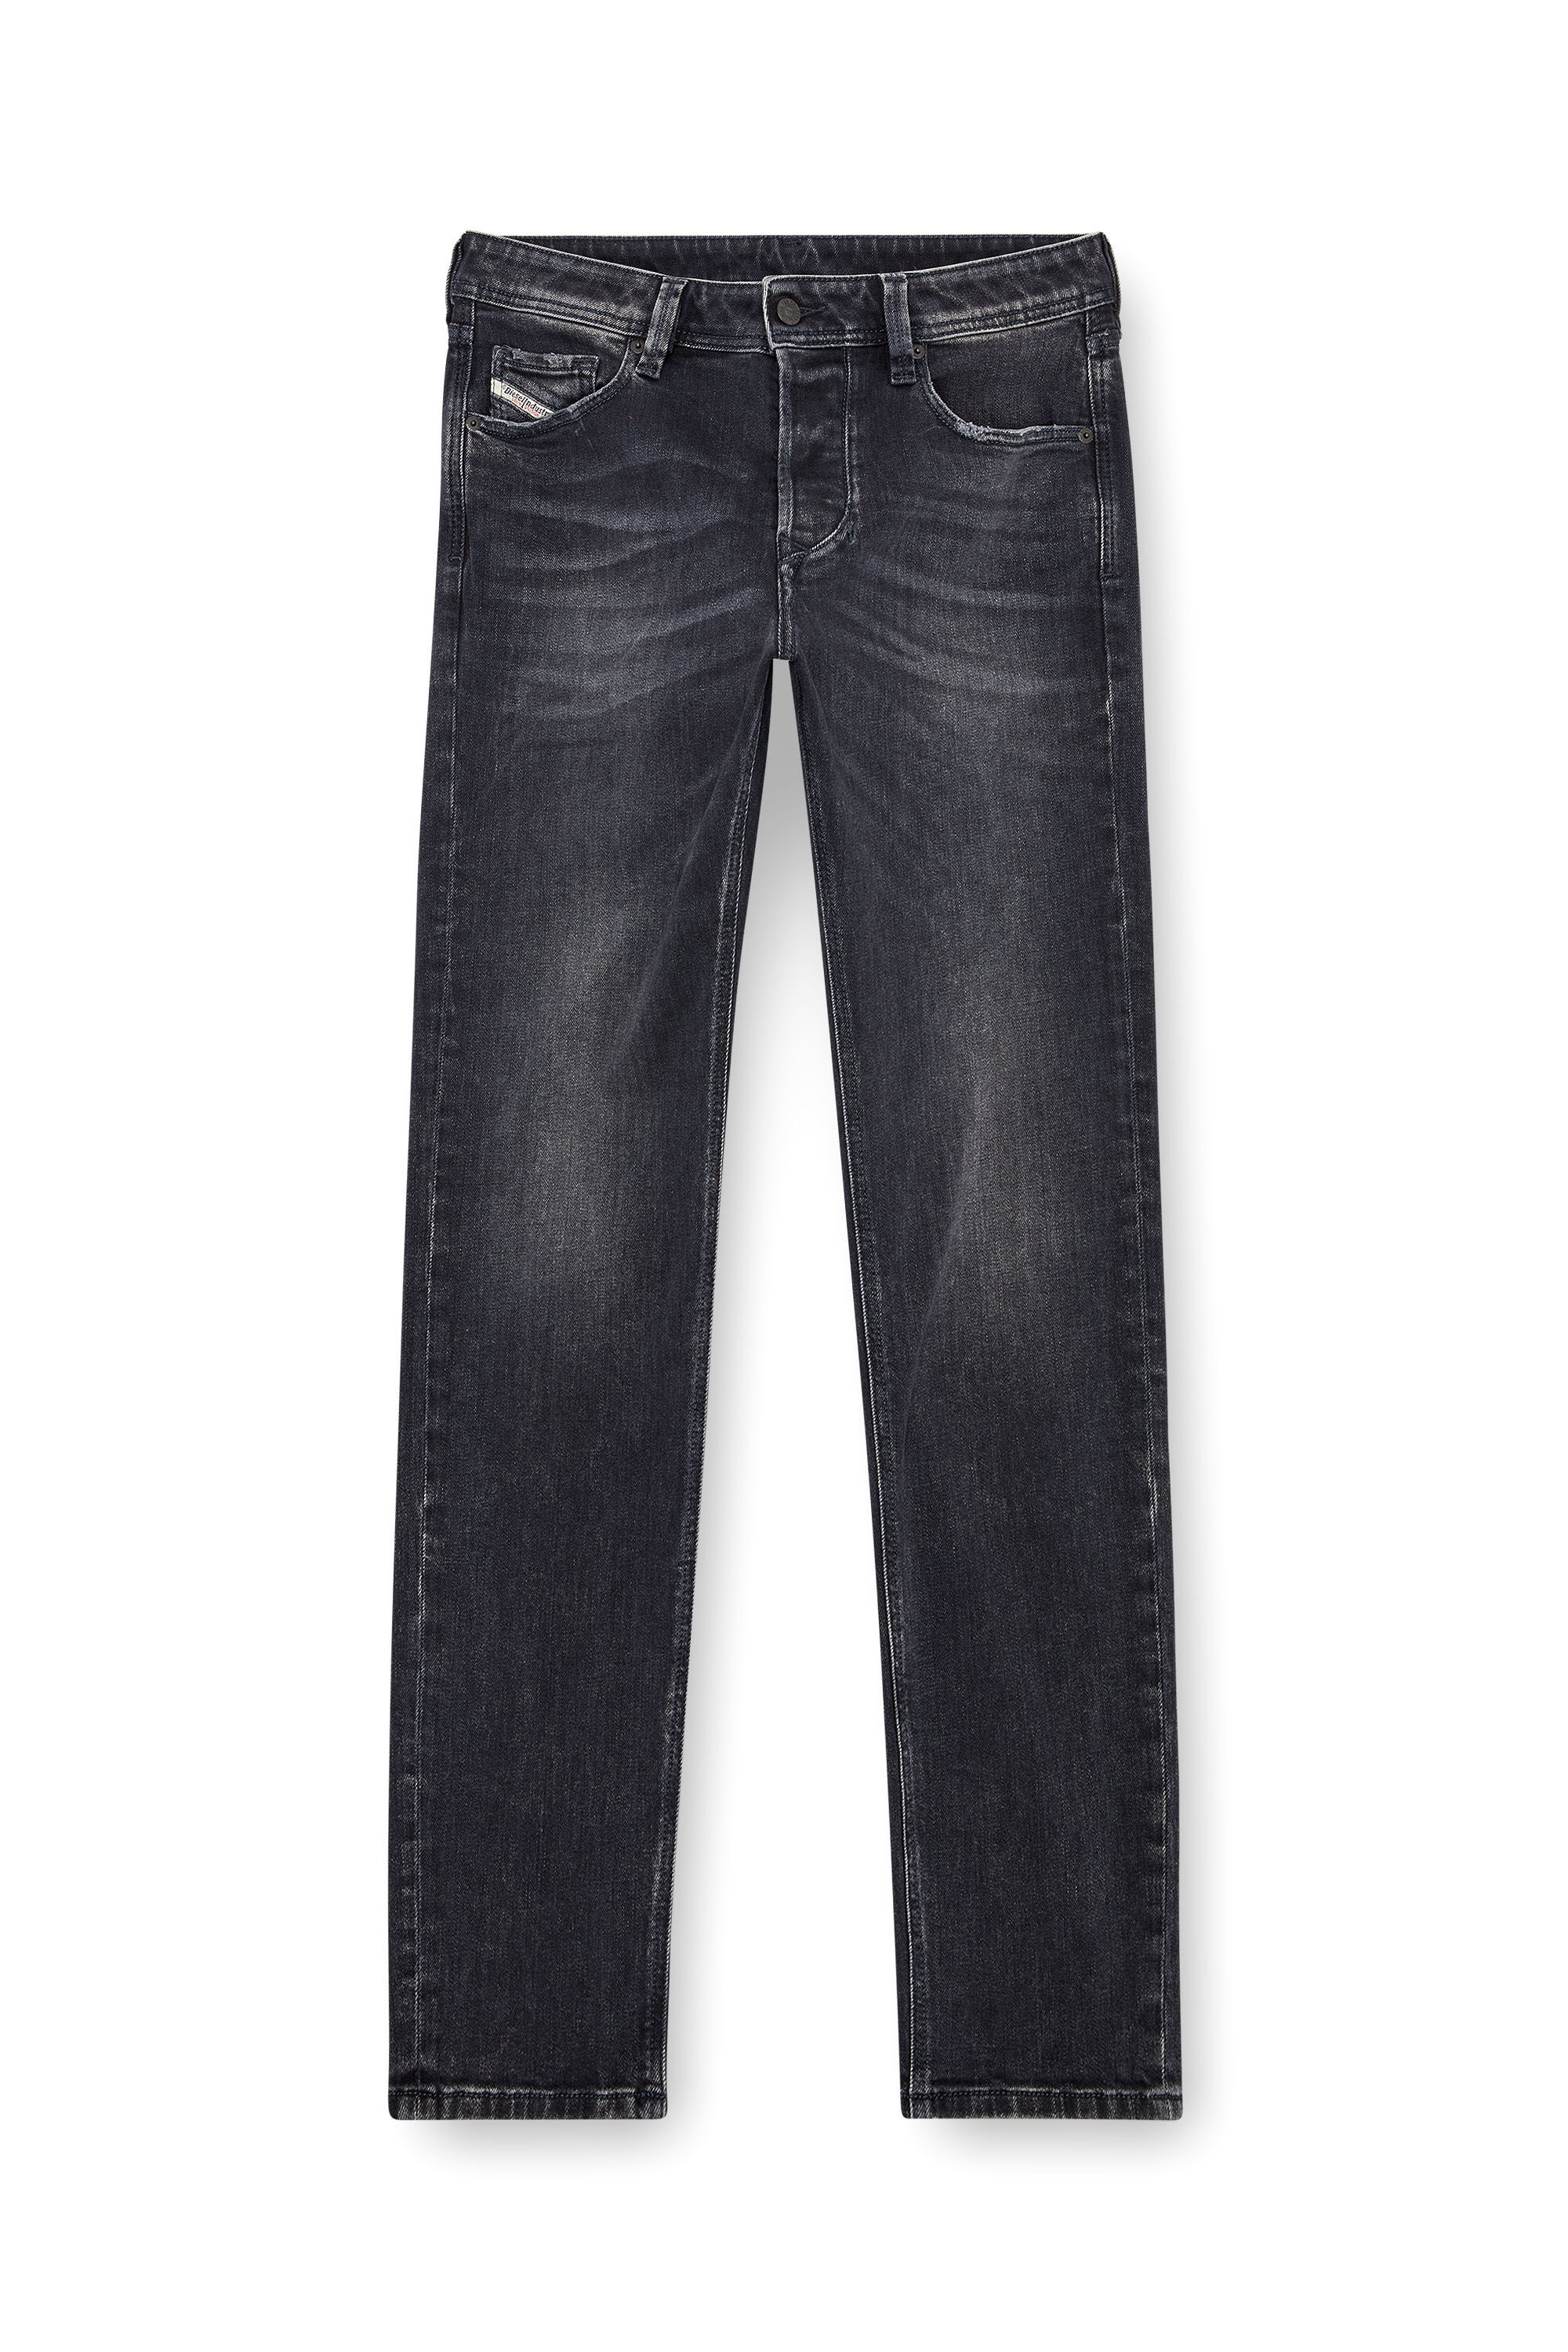 Diesel - Tapered Jeans 1986 Larkee-Beex 09K51, Hombre Tapered Jeans - 1986 Larkee-Beex in Negro - Image 2